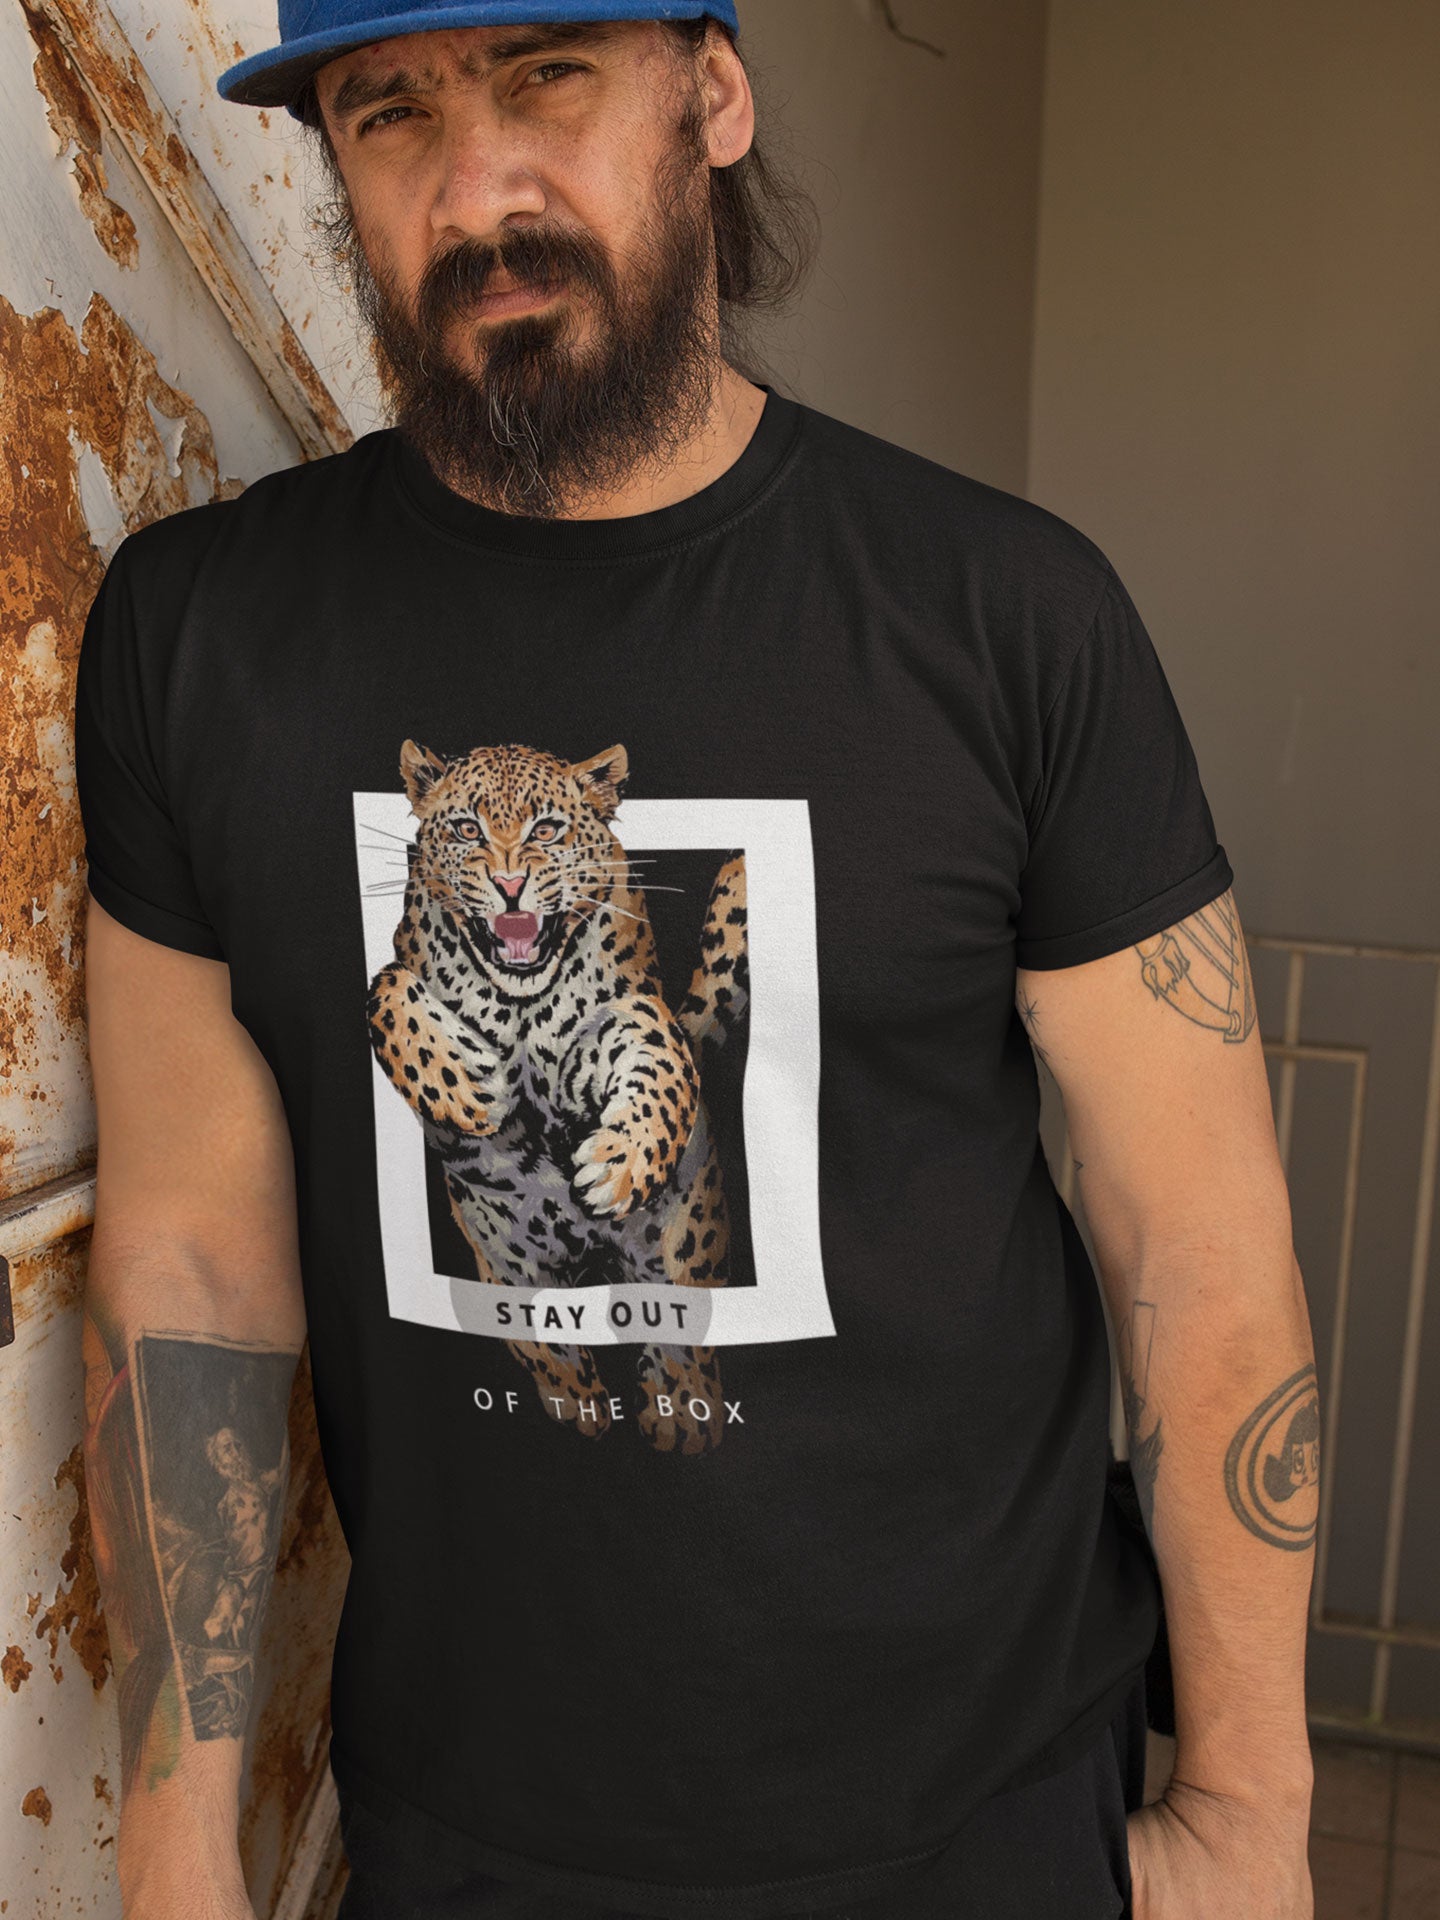 Men's Black Tiger Stay Out Of The Box Printed T-shirt